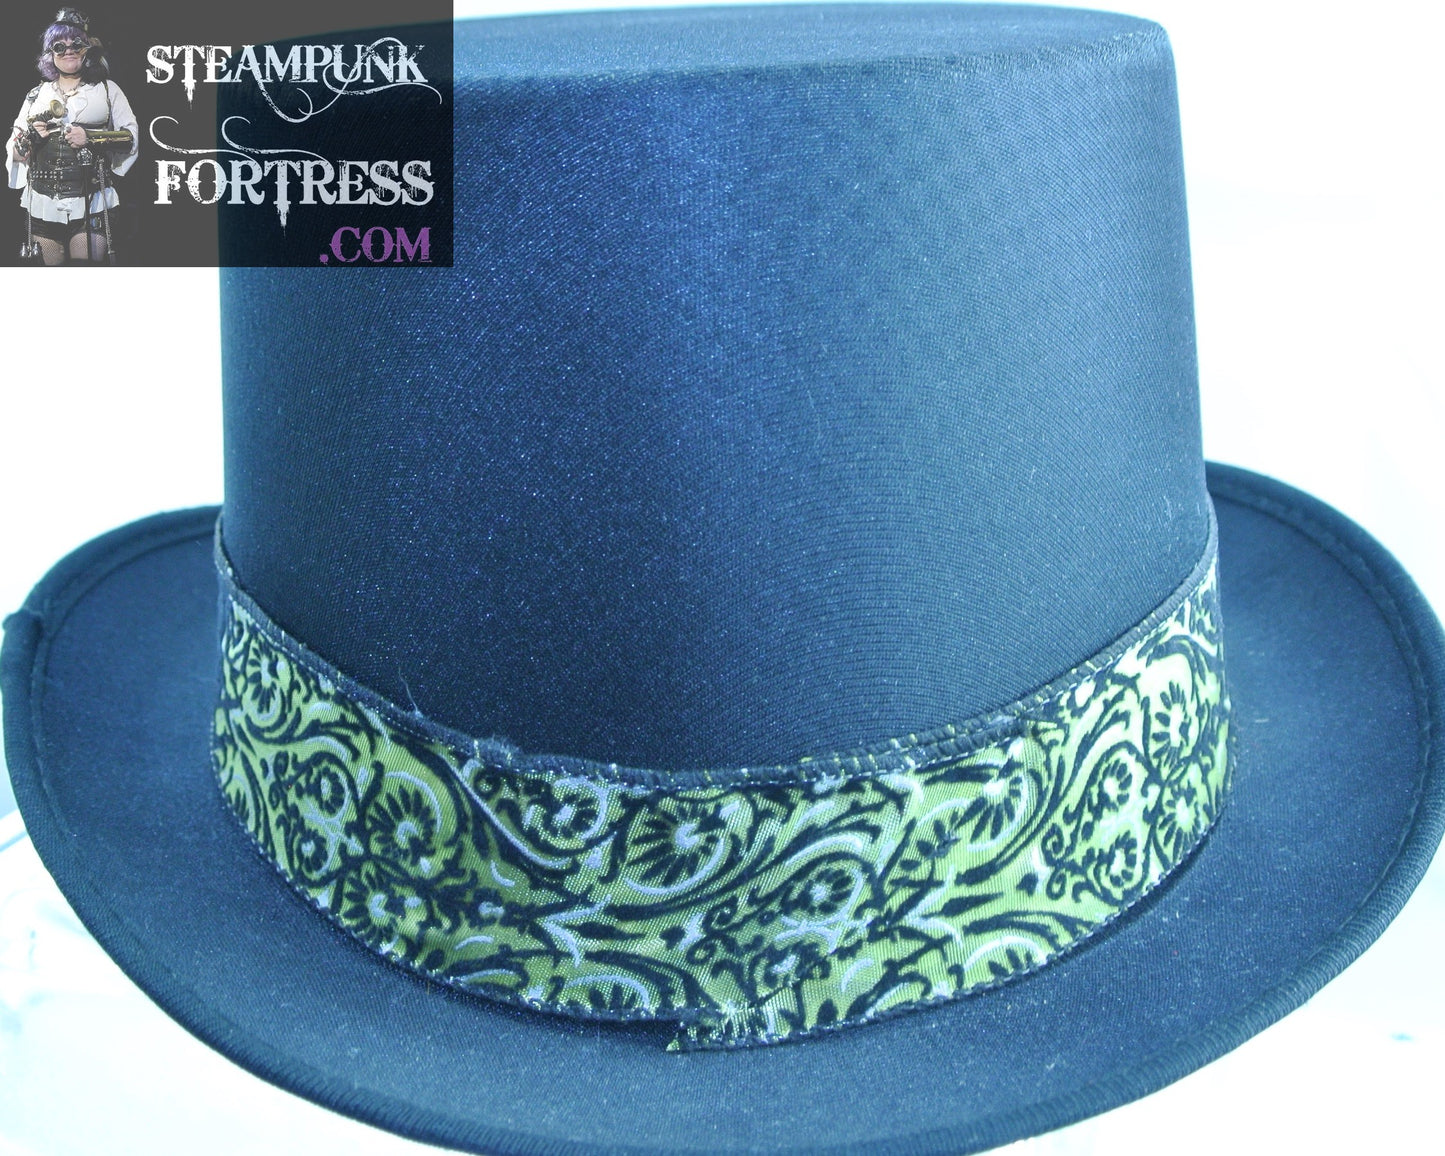 BLACK SATIN GREEN BLACK FLOCKED RIBBON BAND EXTRA LARGE XL SATIN MINIMALIST FULL SIZE TOP HAT GREAT CREATE BUILD YOUR OWN STEAMPUNK HAT BASE STARR WILDE STEAMPUNK FORTRESS